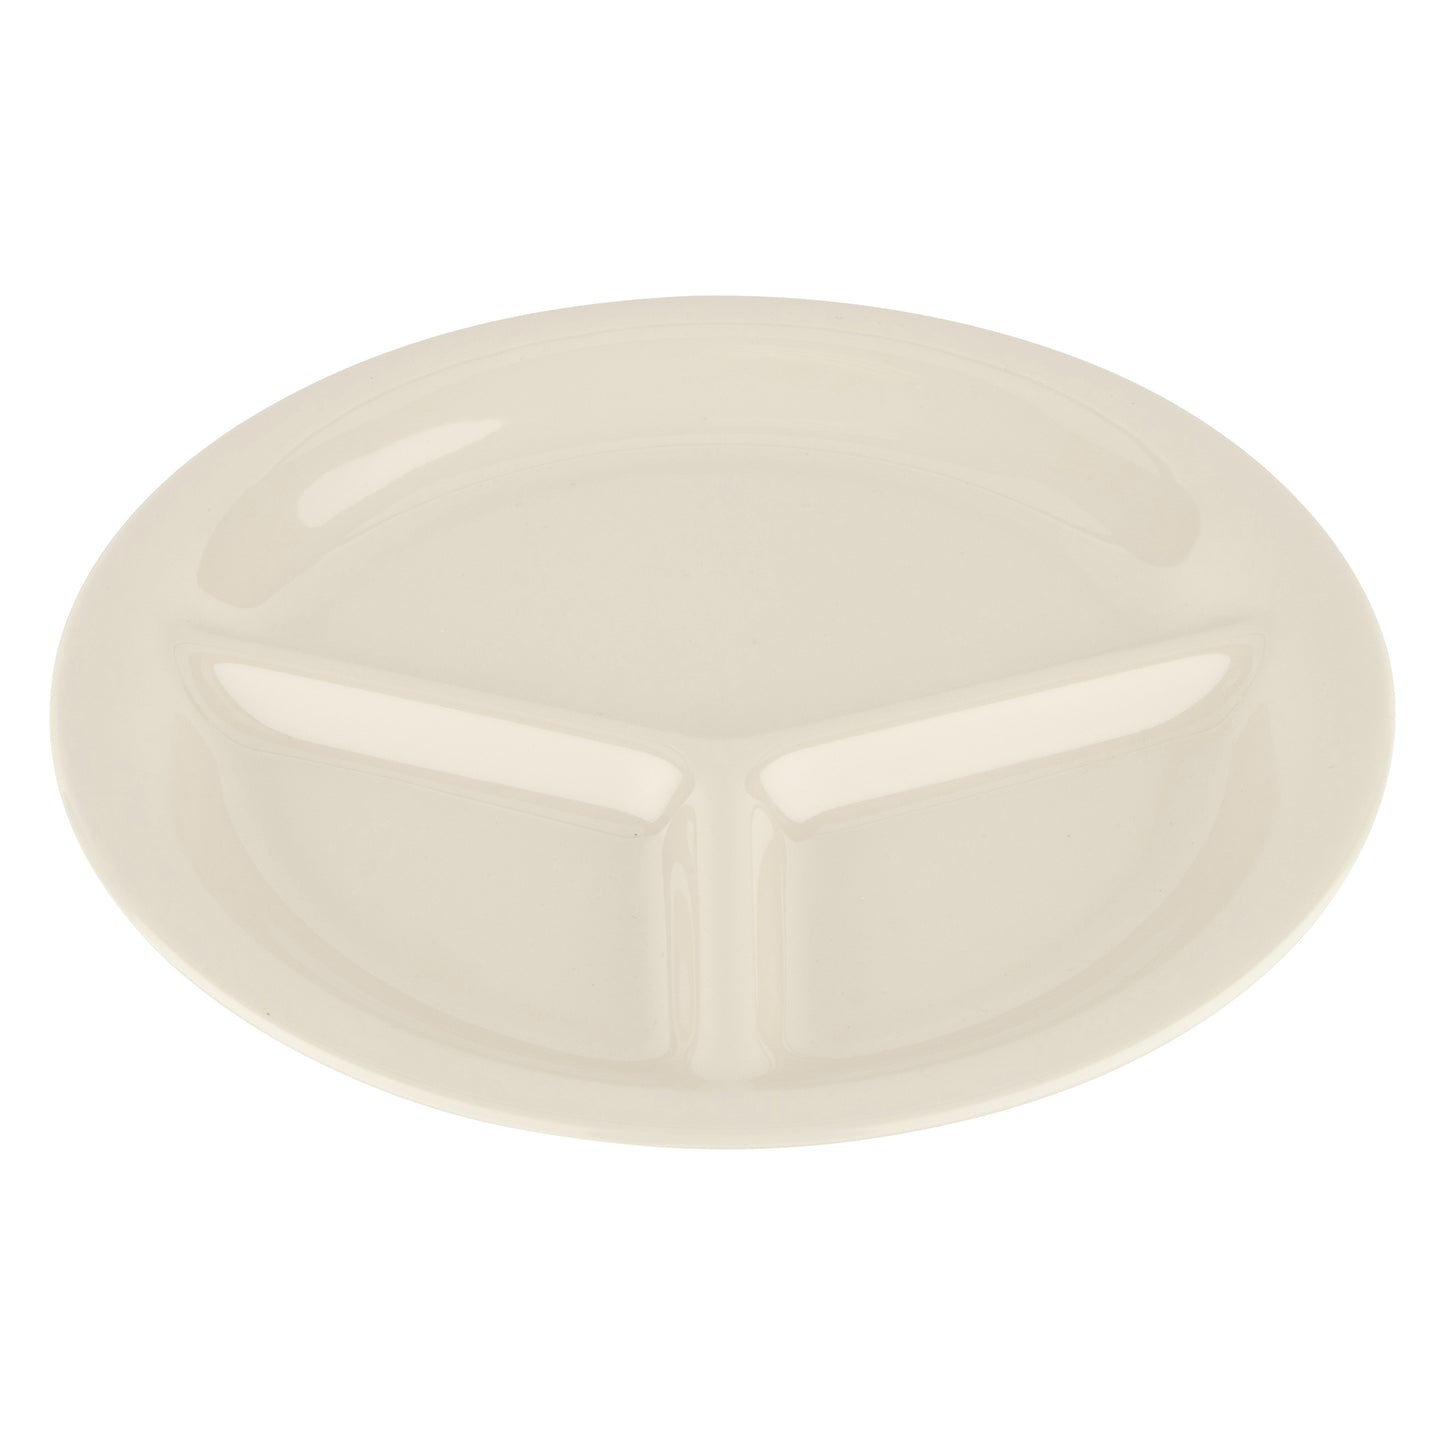 10.25" 3-Compartment Plate (Set of 4 ea.)